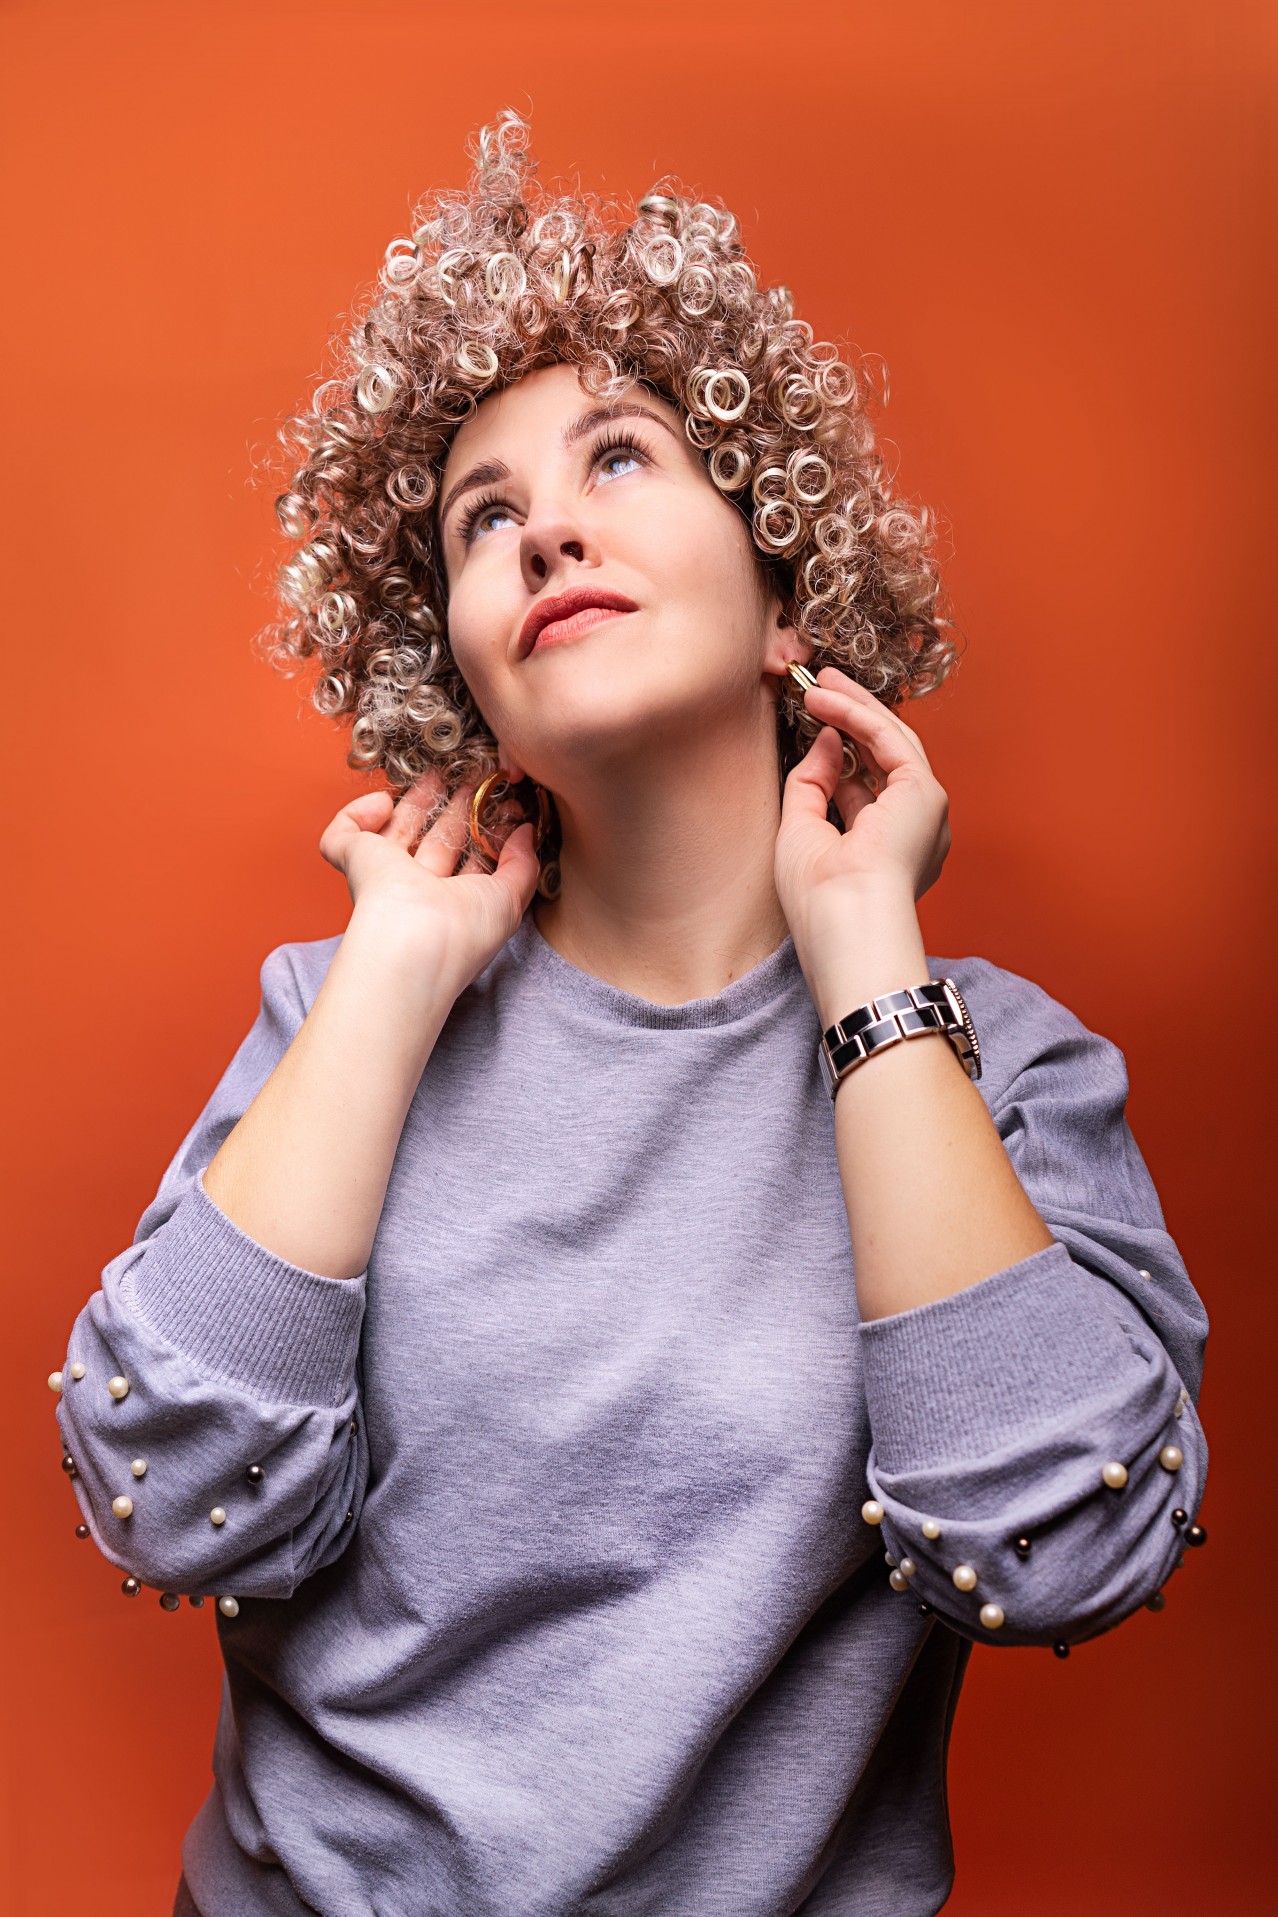 Young Woman with Curls on an Orange Background